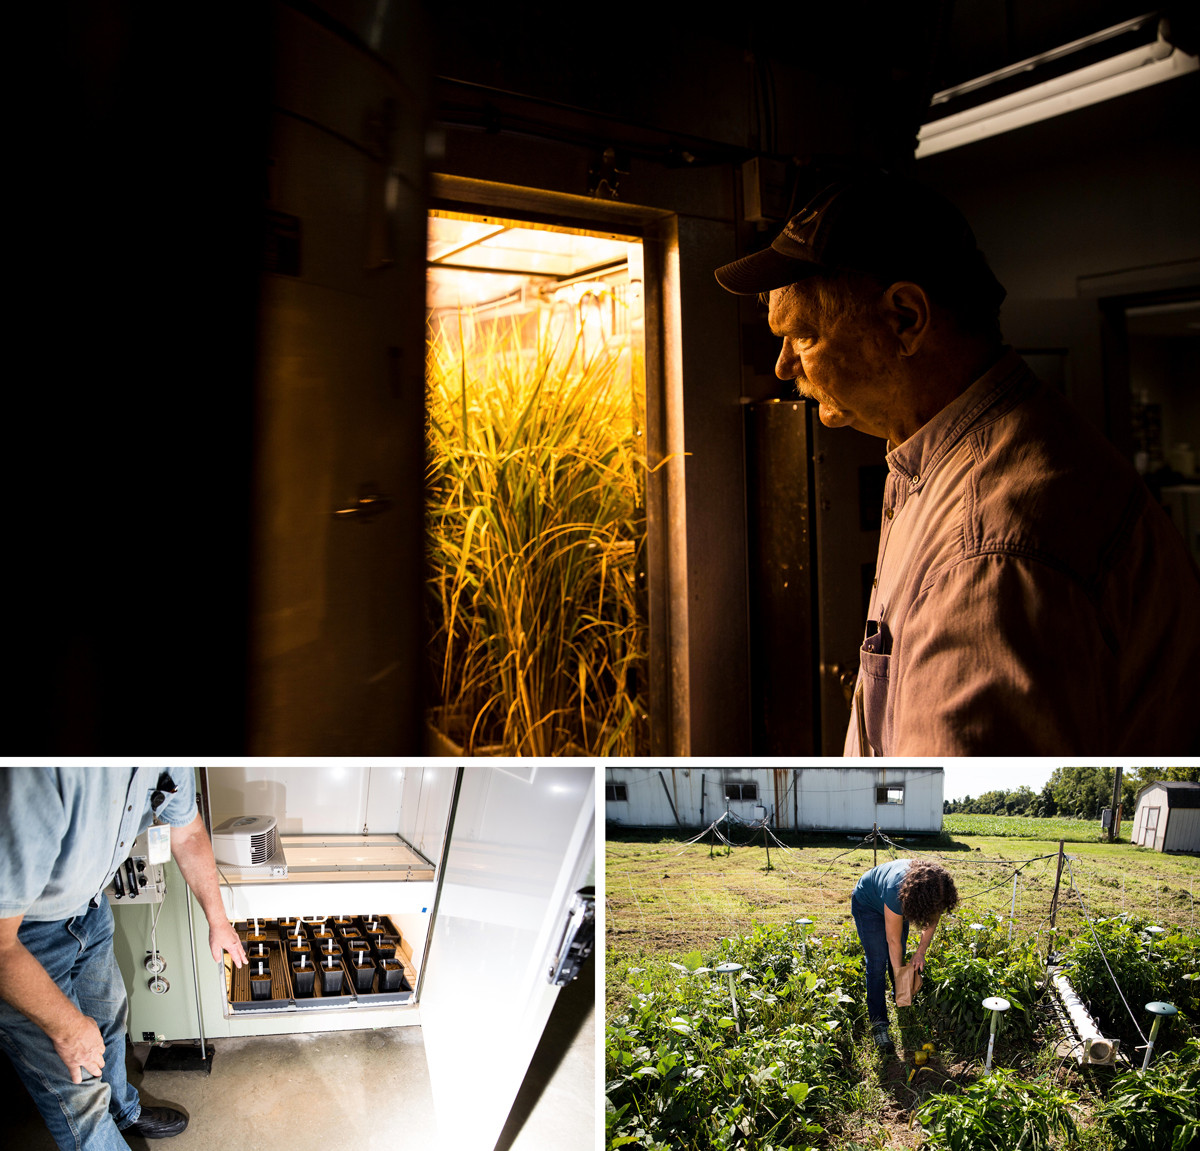 Lewis Ziska, a plant physiologist with the U.S. Department of Agriculture, examines rice growing in his laboratory in Beltsville, Md. Ziska and his colleagues are conducting experiments to find out how rising carbon dioxide levels affect the nutrient profile of plants. Plant physiologist Julie Wolf harvests peppers to study changes in vitamin C, lower right.